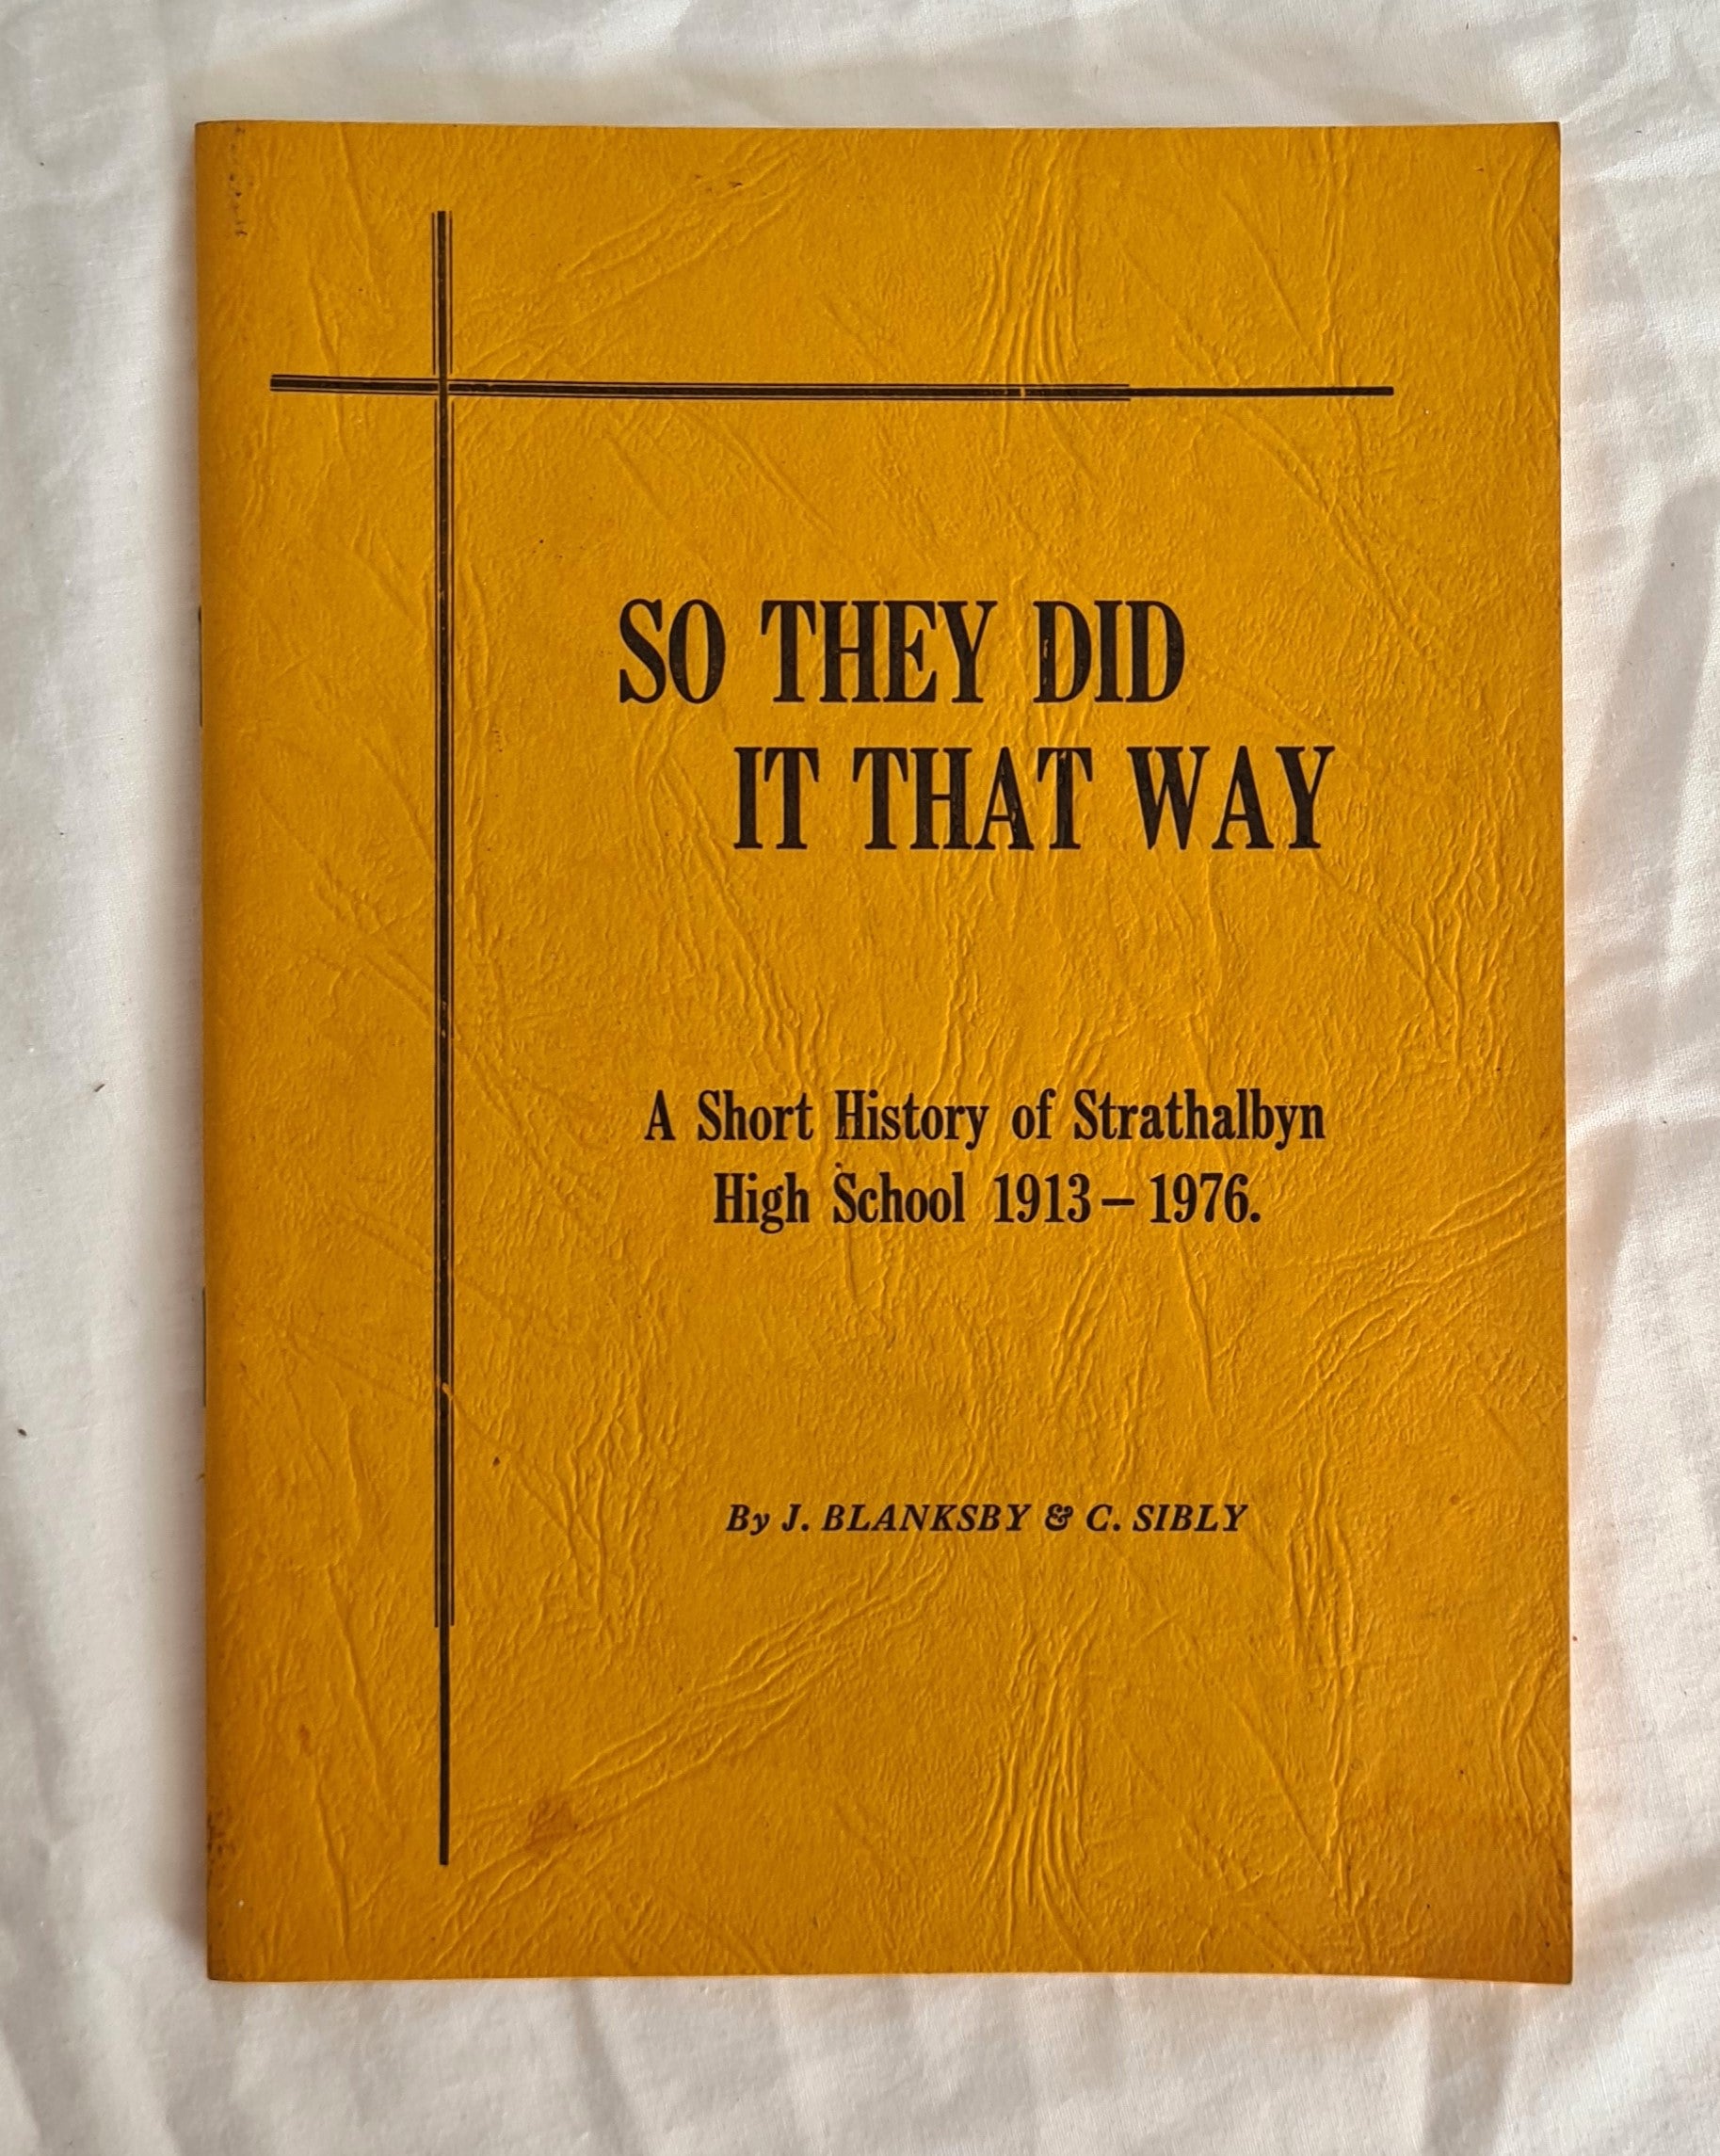 So They Did It That Way  A Short History of Strathalbyn High School 1913-1976  by J. Blanksby and C. Sibly